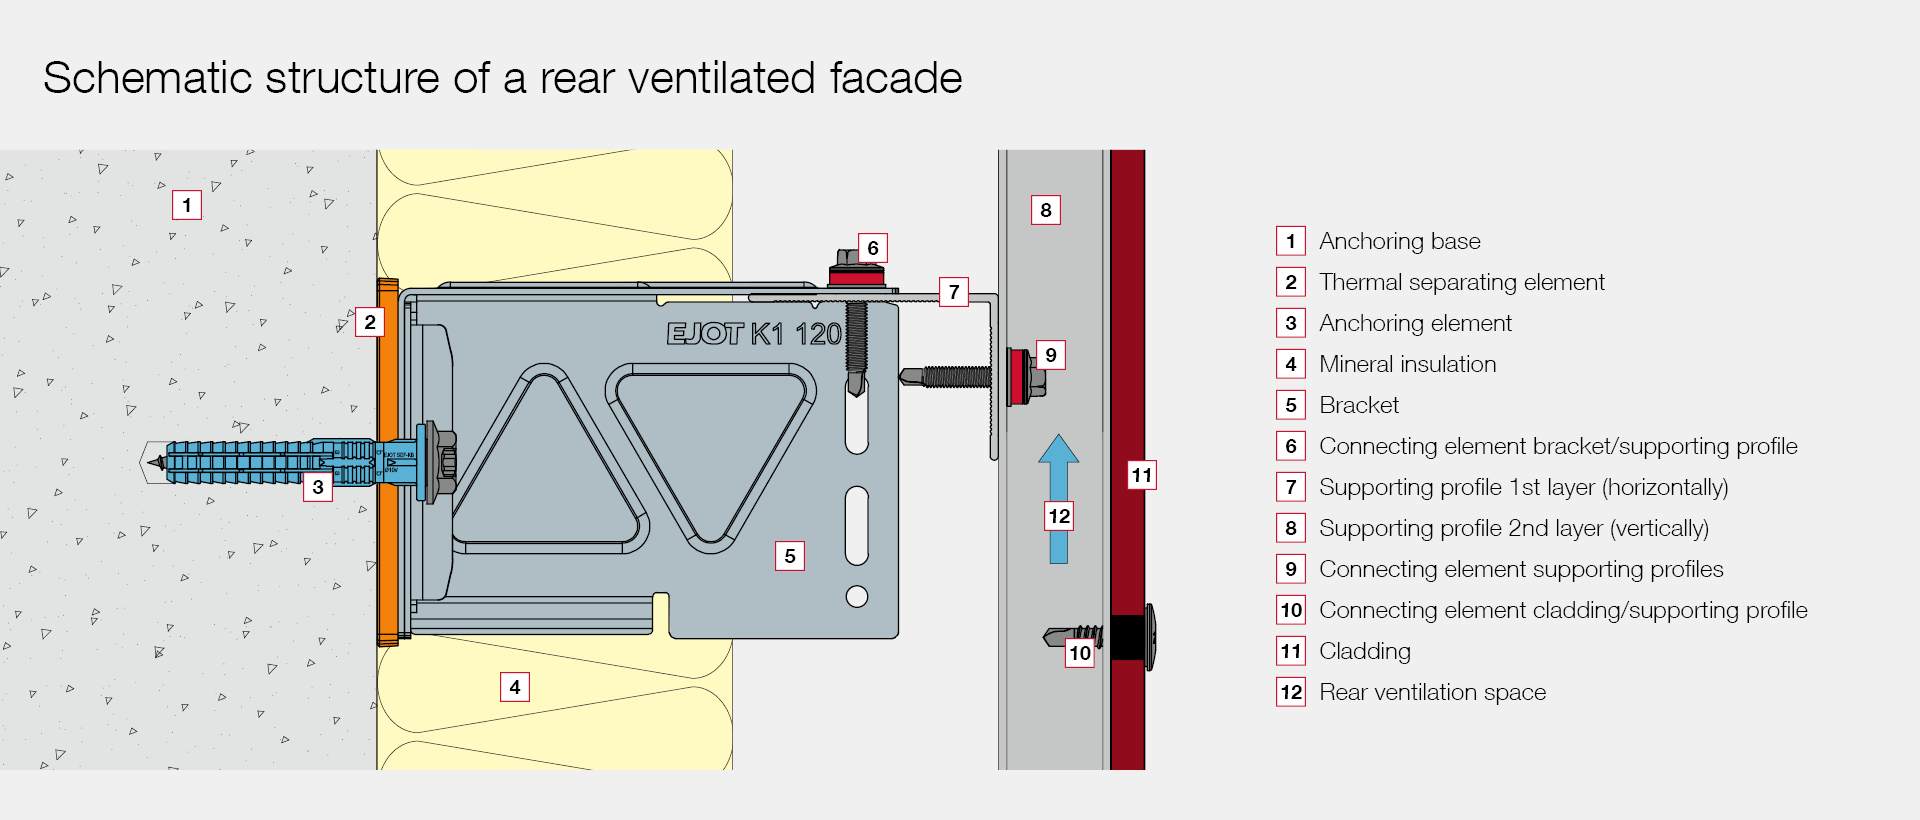 Schematic structure of a rear venitlated facade